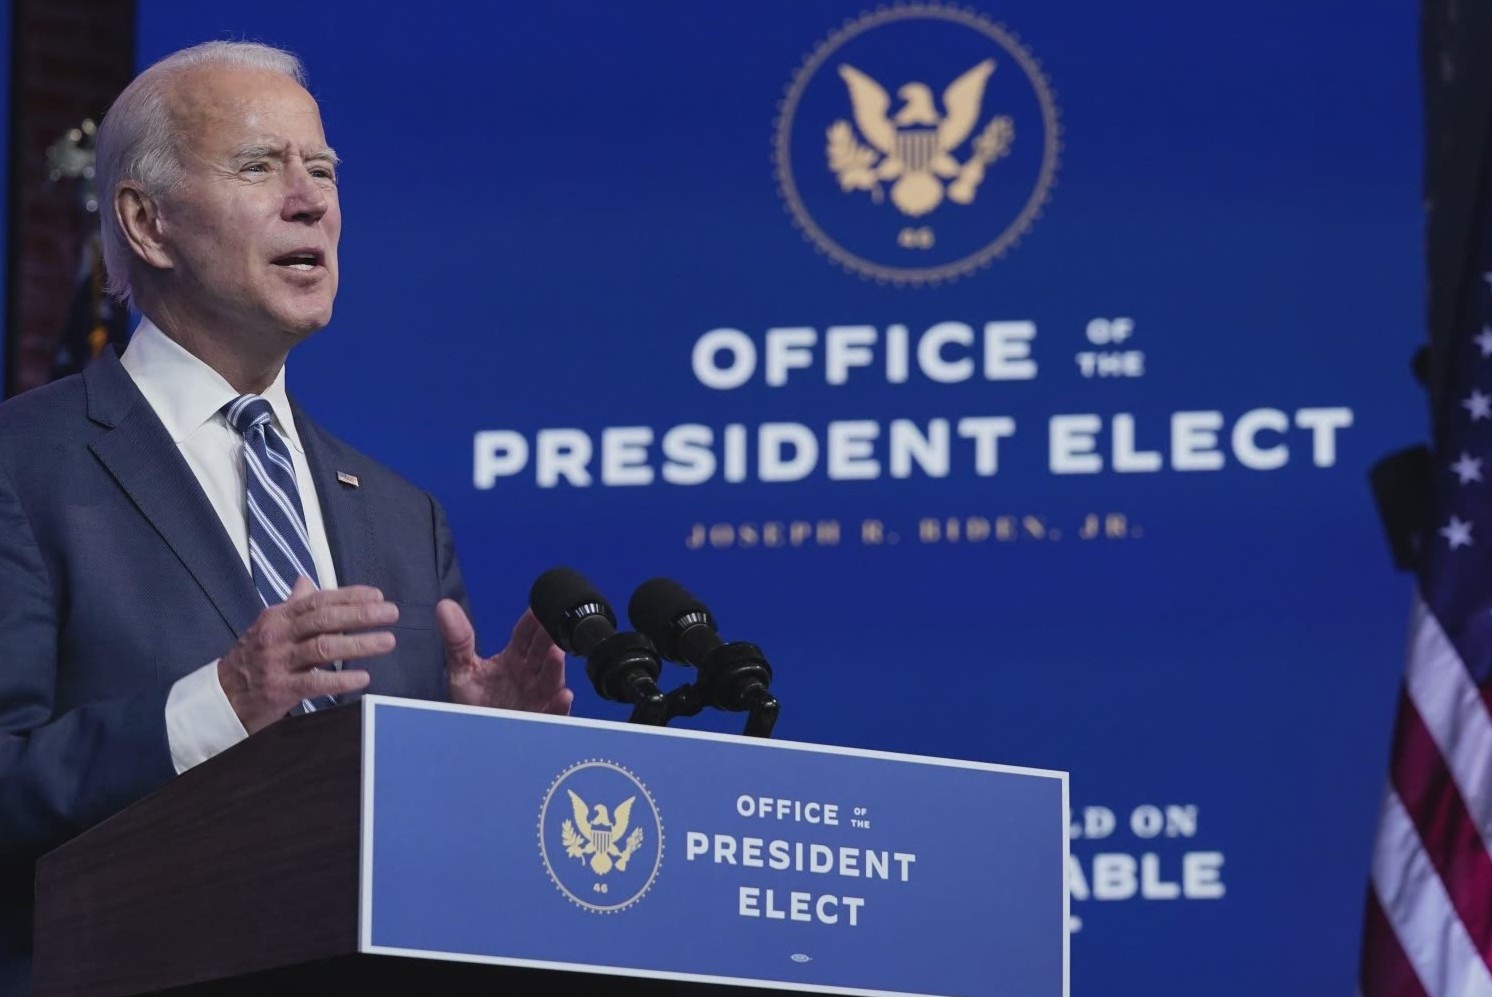 Joe Biden stands at a podium that has a fancy-looking
seal with an eagle and the text 'office of the president elect'